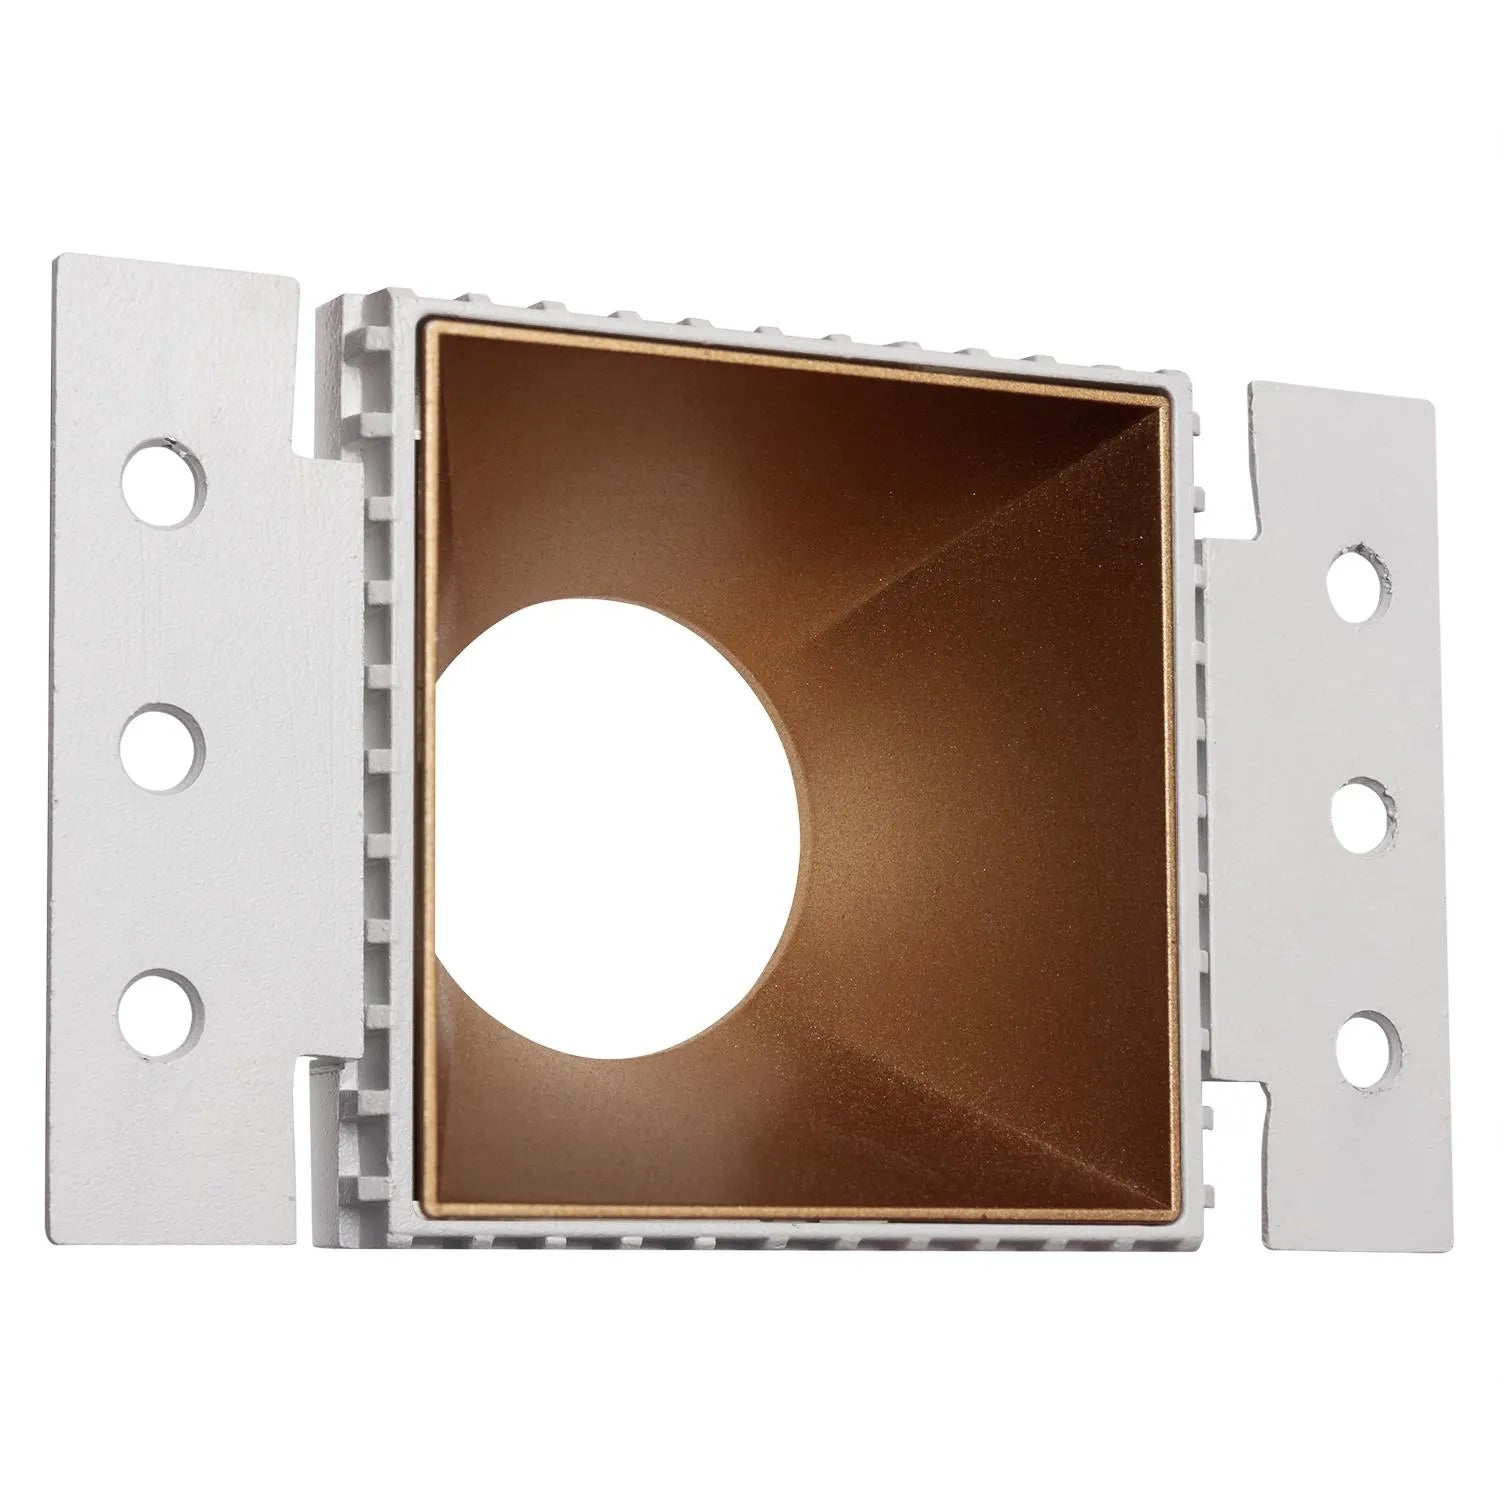 Westgate LRD-TL-10W-35K-4S-MG LED 4" Round Architectural Trimless Recessed Light Residential Lighting - Matte Gold